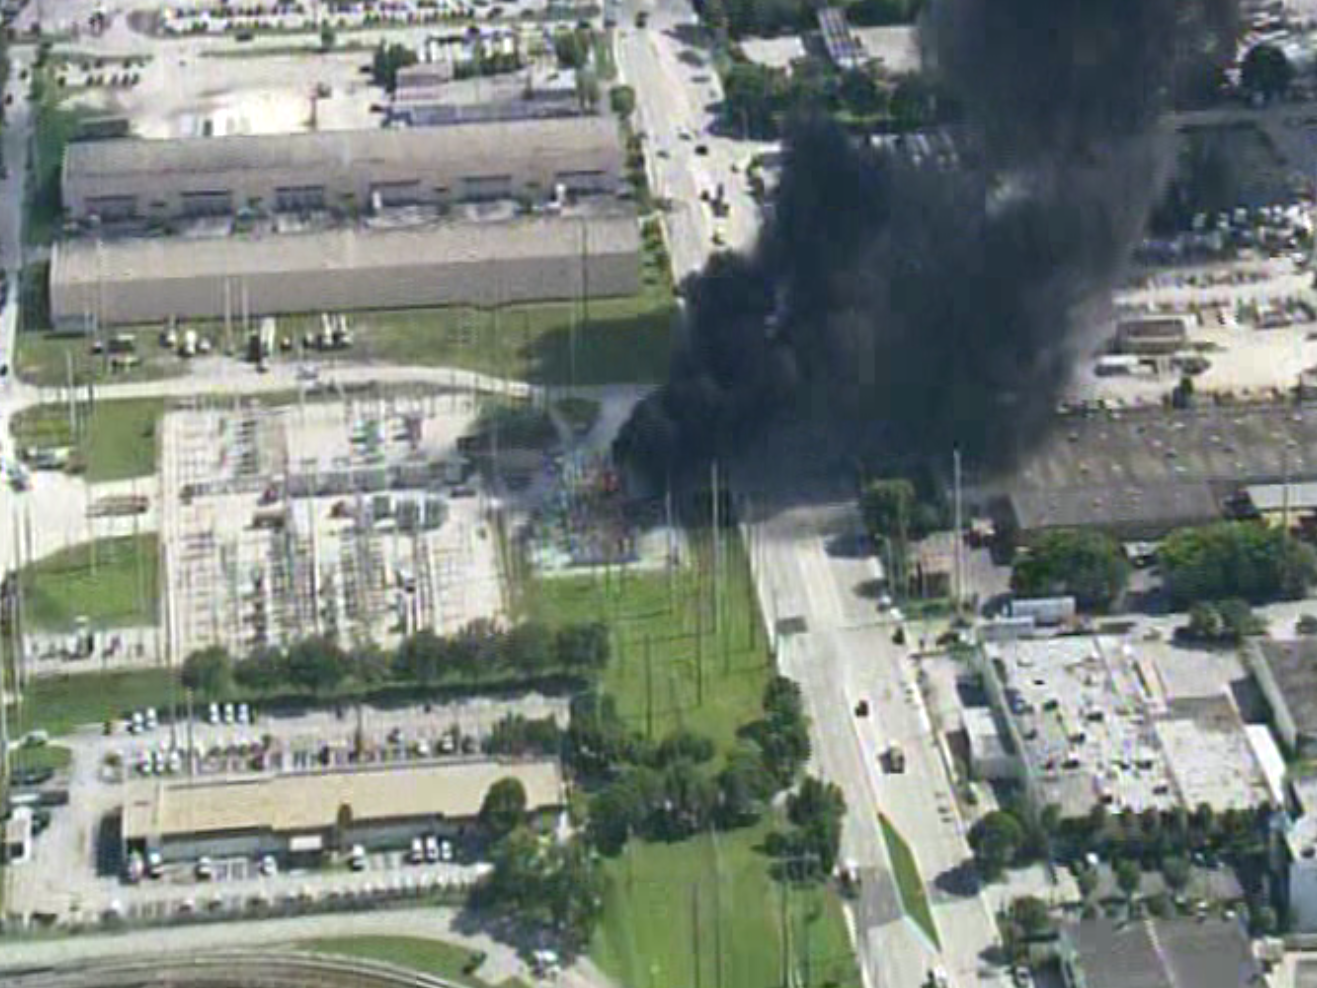 Black smoke billowed out of a West-Miami Dade Florida Power & Light plant on Tuesday afternoon. (Source: CBS4) 